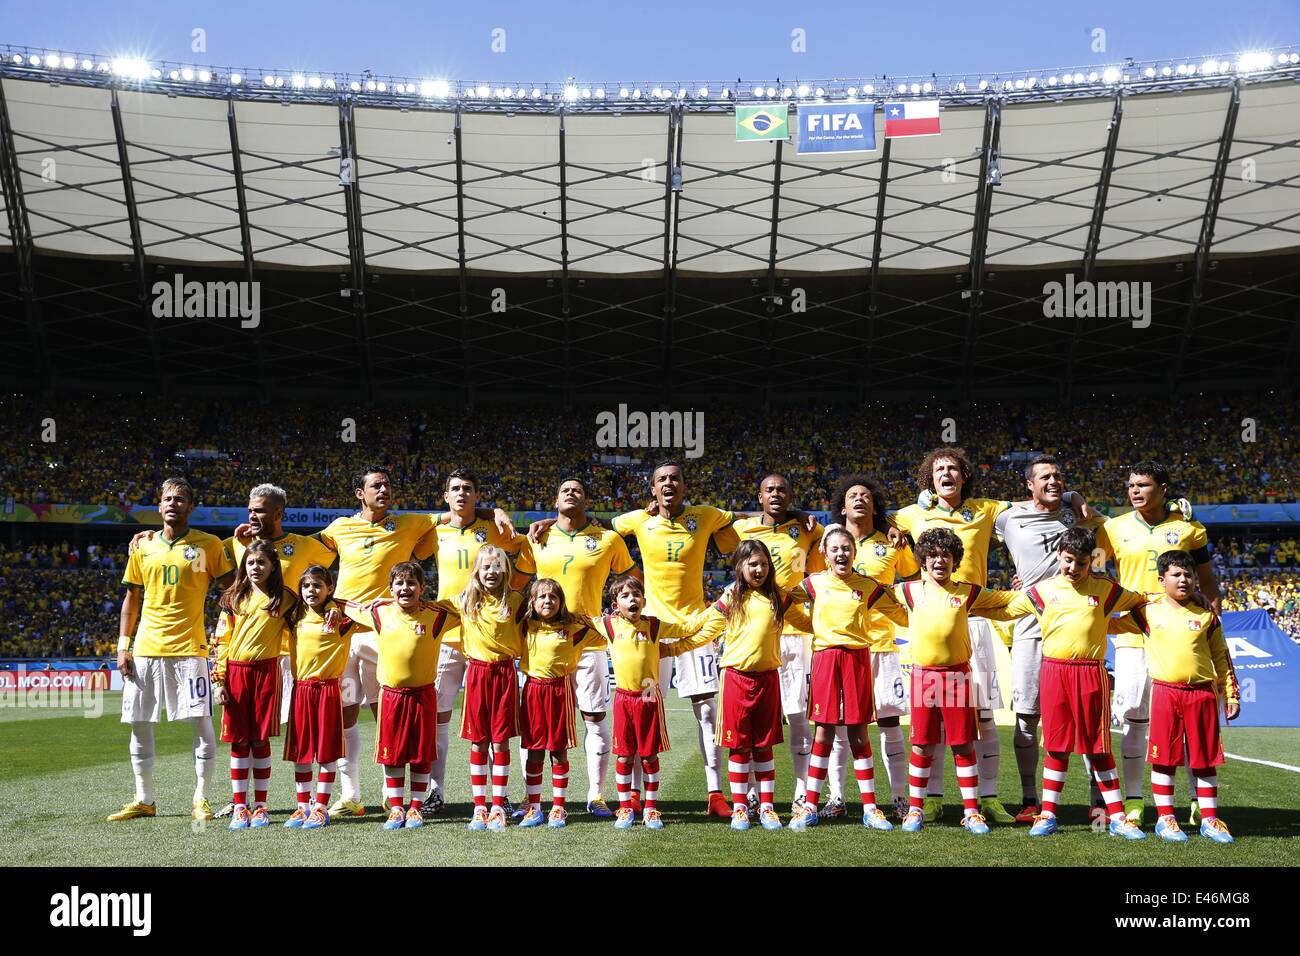 Belo Horizonte, Brazil. 28th June, 2014. Brazil team group line-up (BRA) Football/Soccer : FIFA World Cup Brazil 2014 round of 16 match between Brazil and Chile at the Mineirao Stadium in Belo Horizonte, Brazil . © AFLO/Alamy Live News Stock Photo